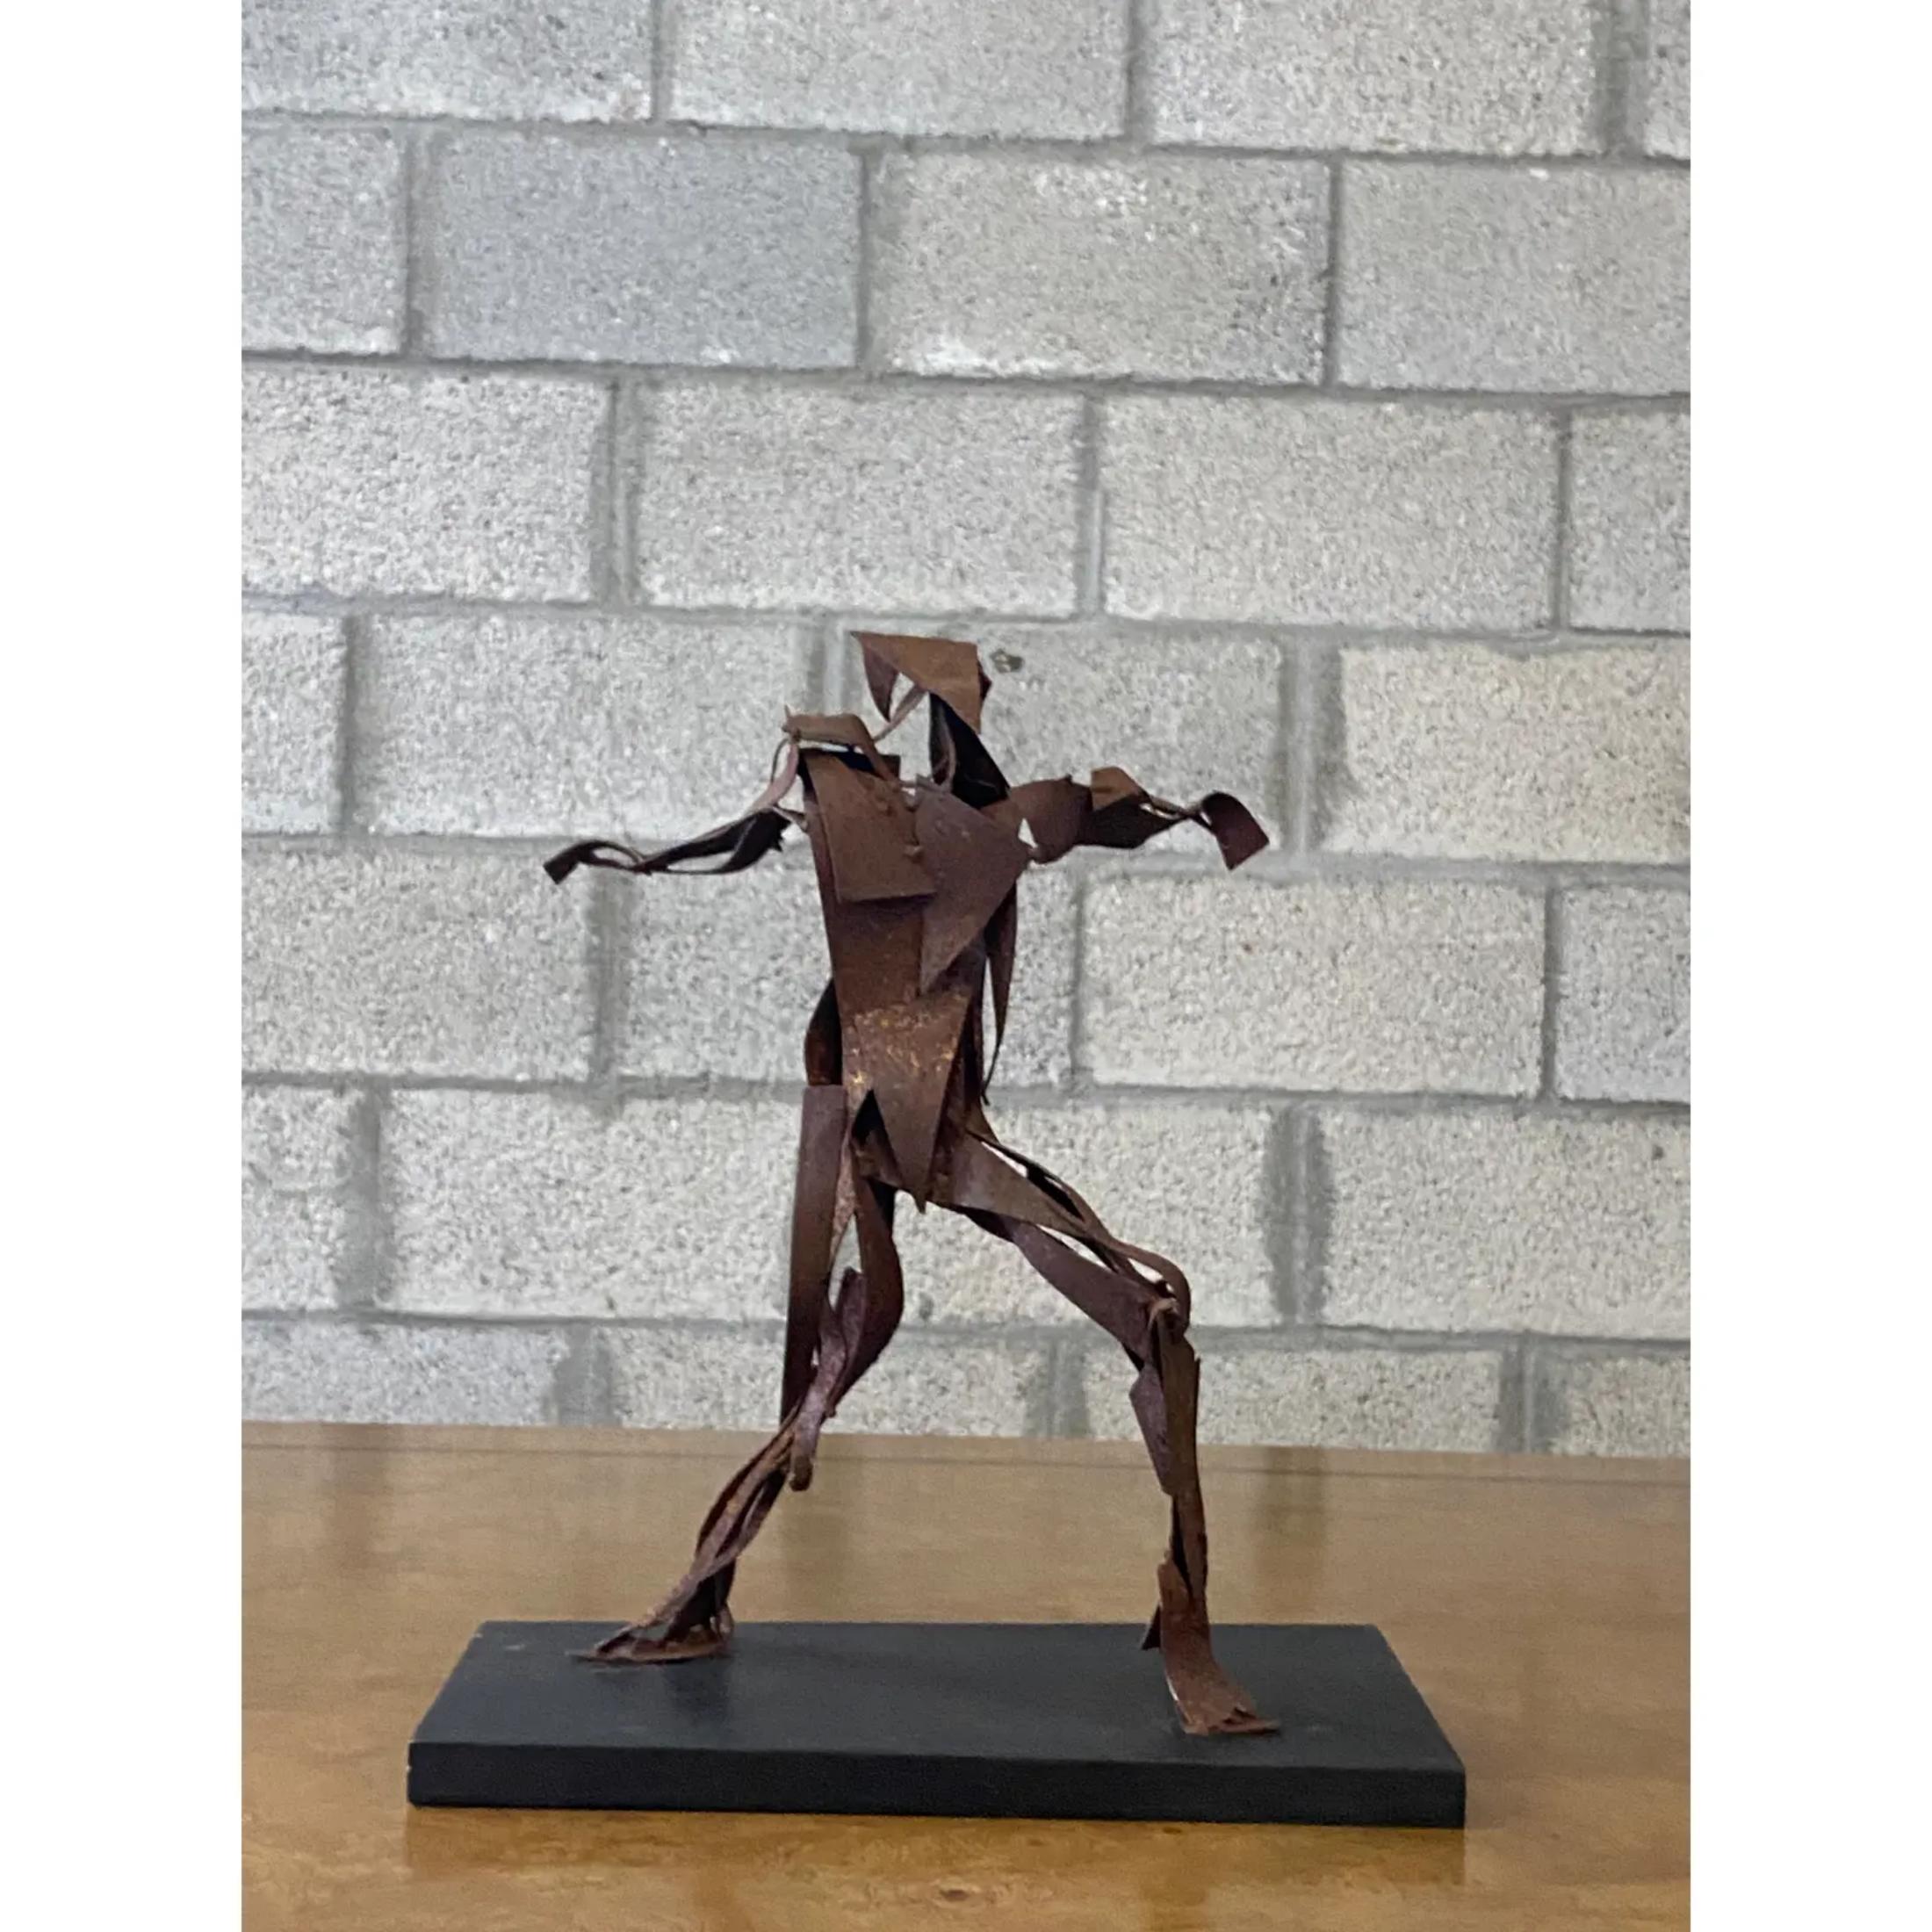 Vintage Midcentury Abstract Rusted Metal Sculpture of Man In Good Condition For Sale In west palm beach, FL